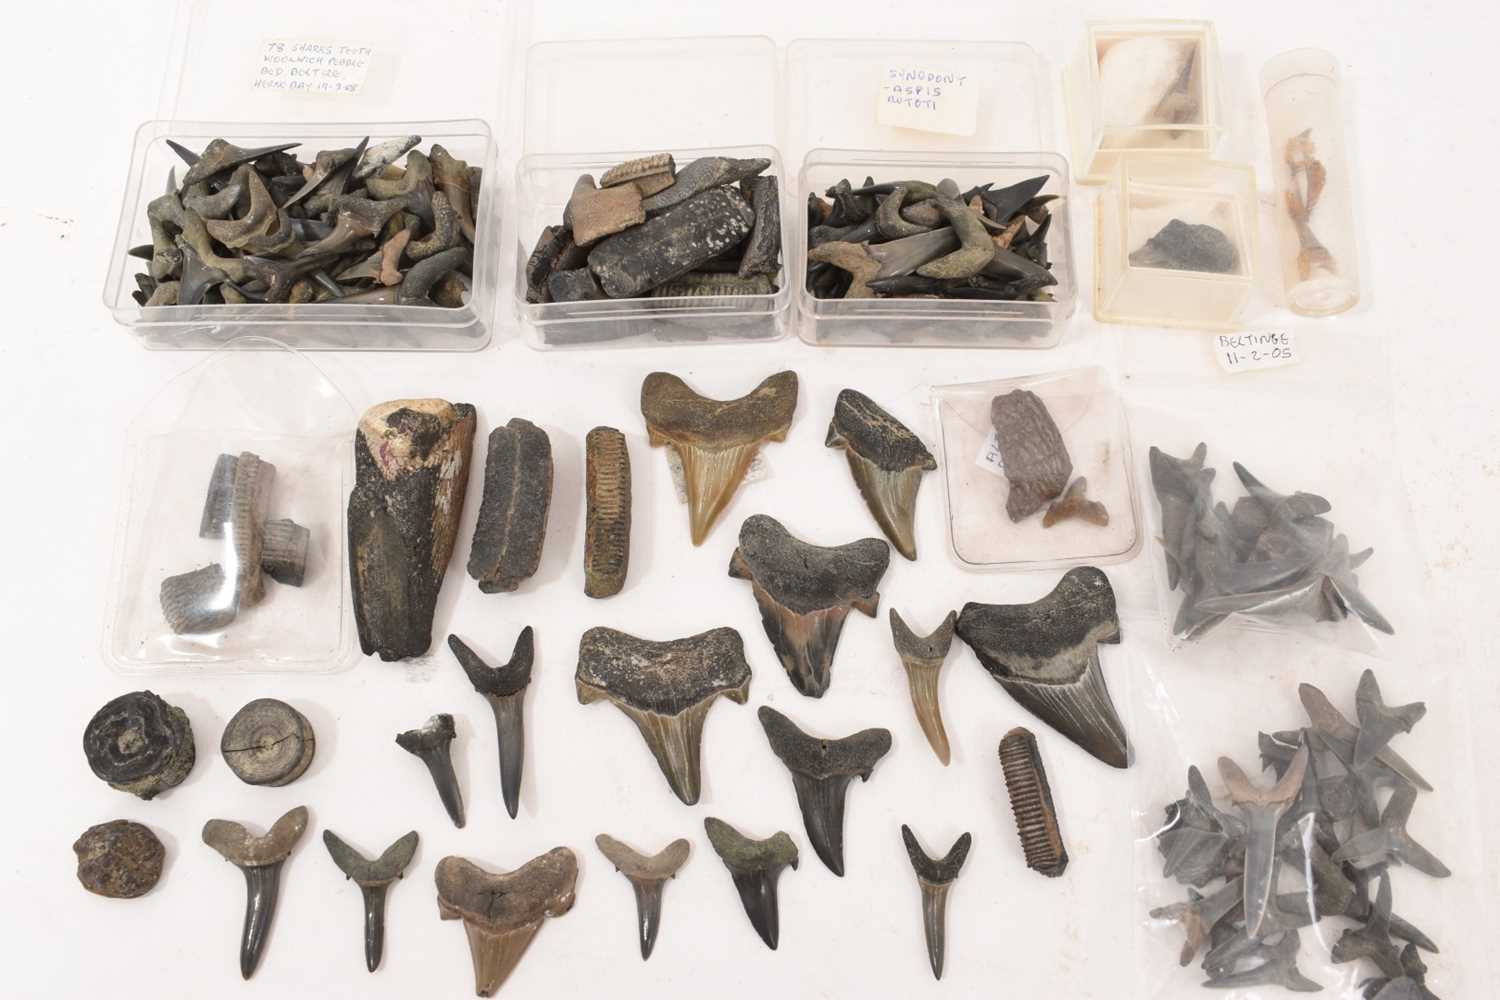 Very large quantity of fossil shark teeth and crinoids, and similar